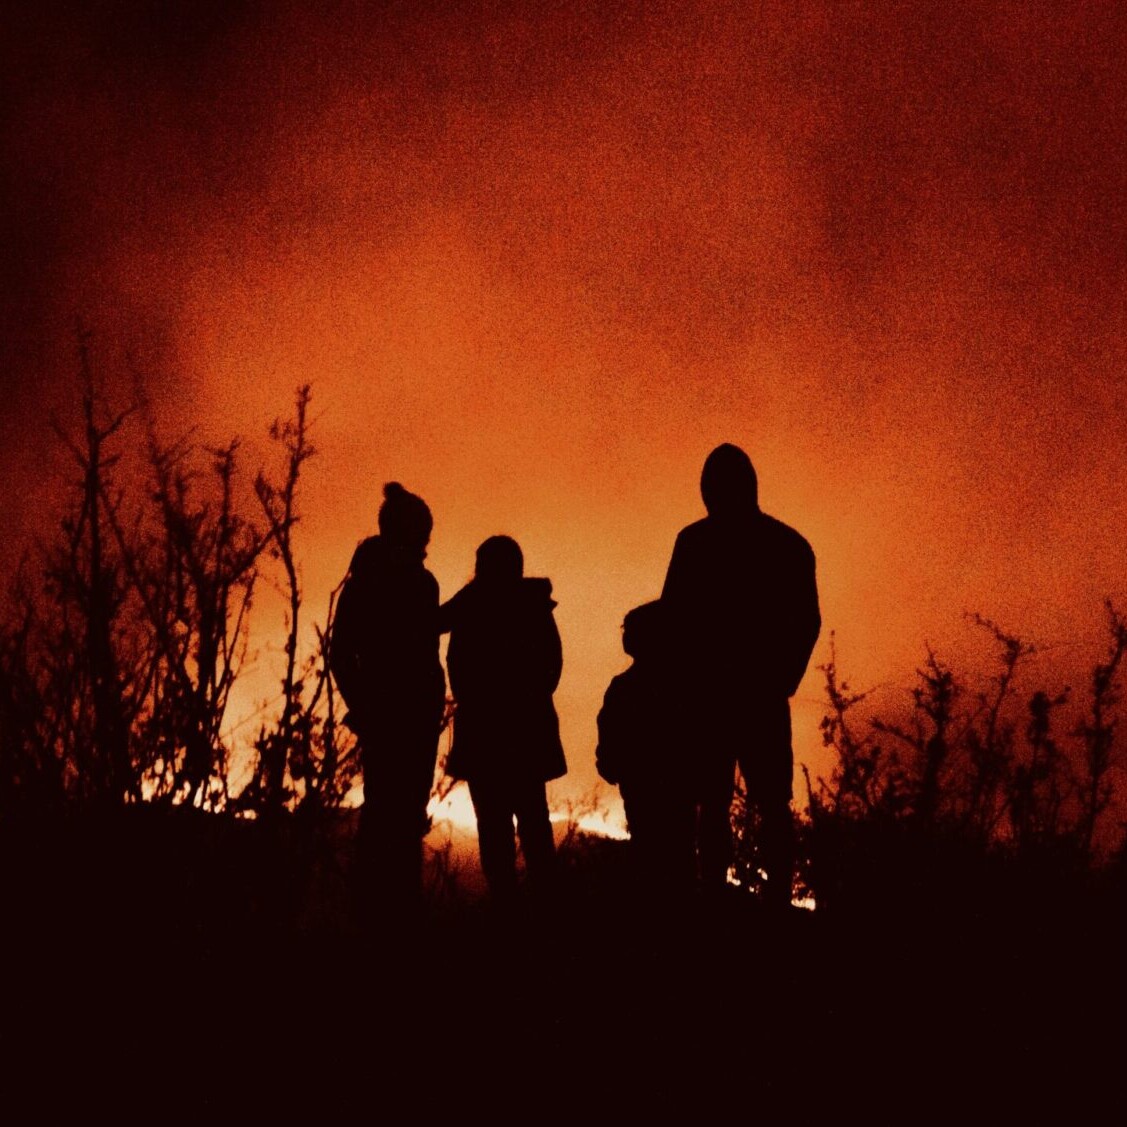 Family silhouetted by forest fire